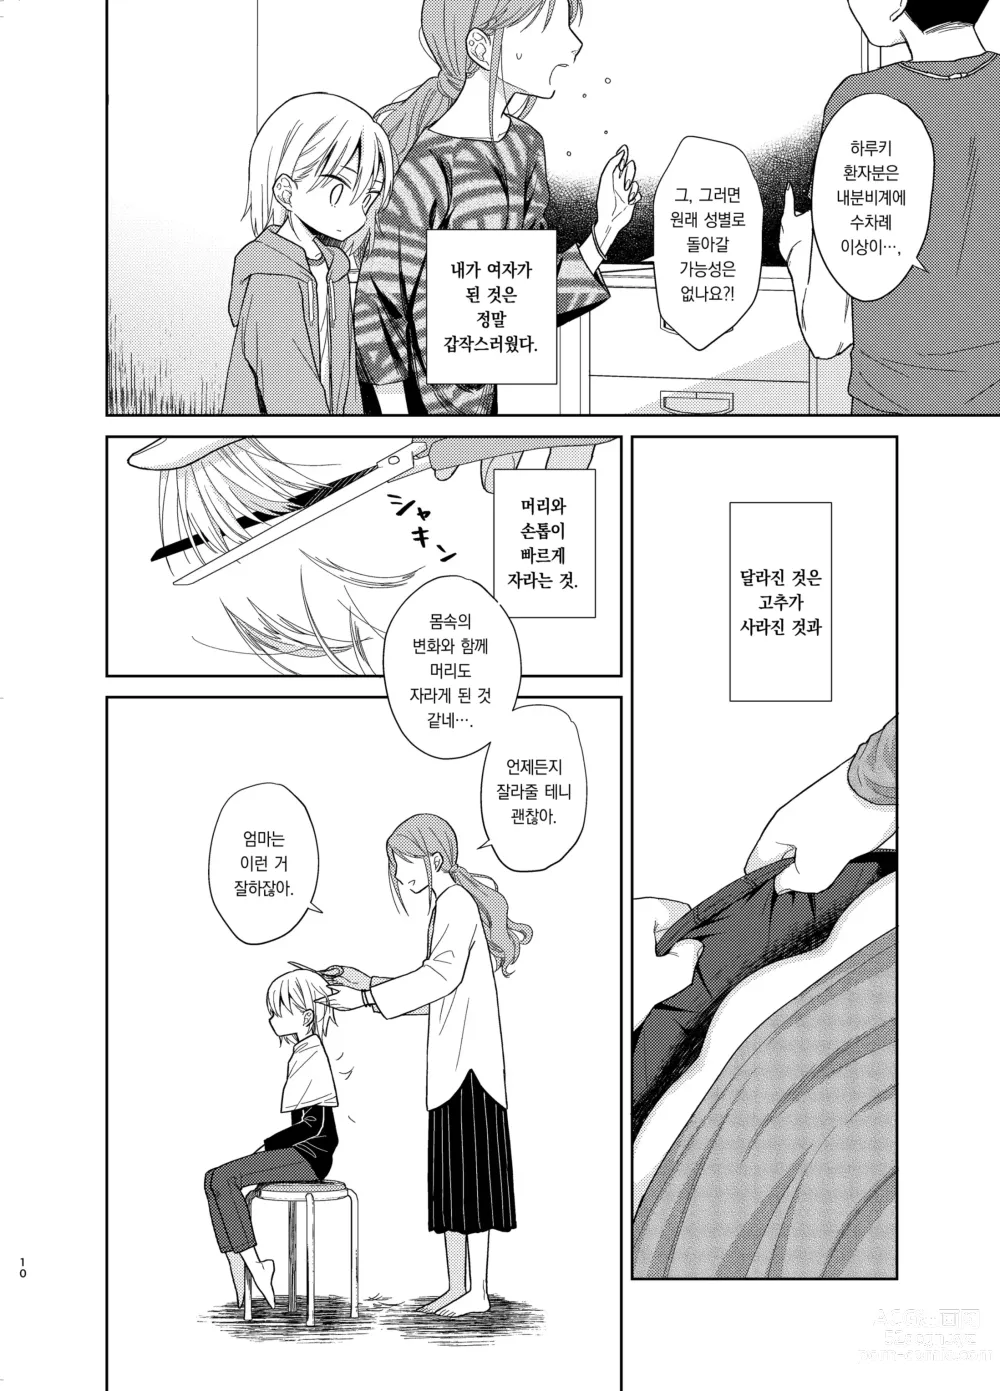 Page 9 of doujinshi TS소녀 하루키 군 5